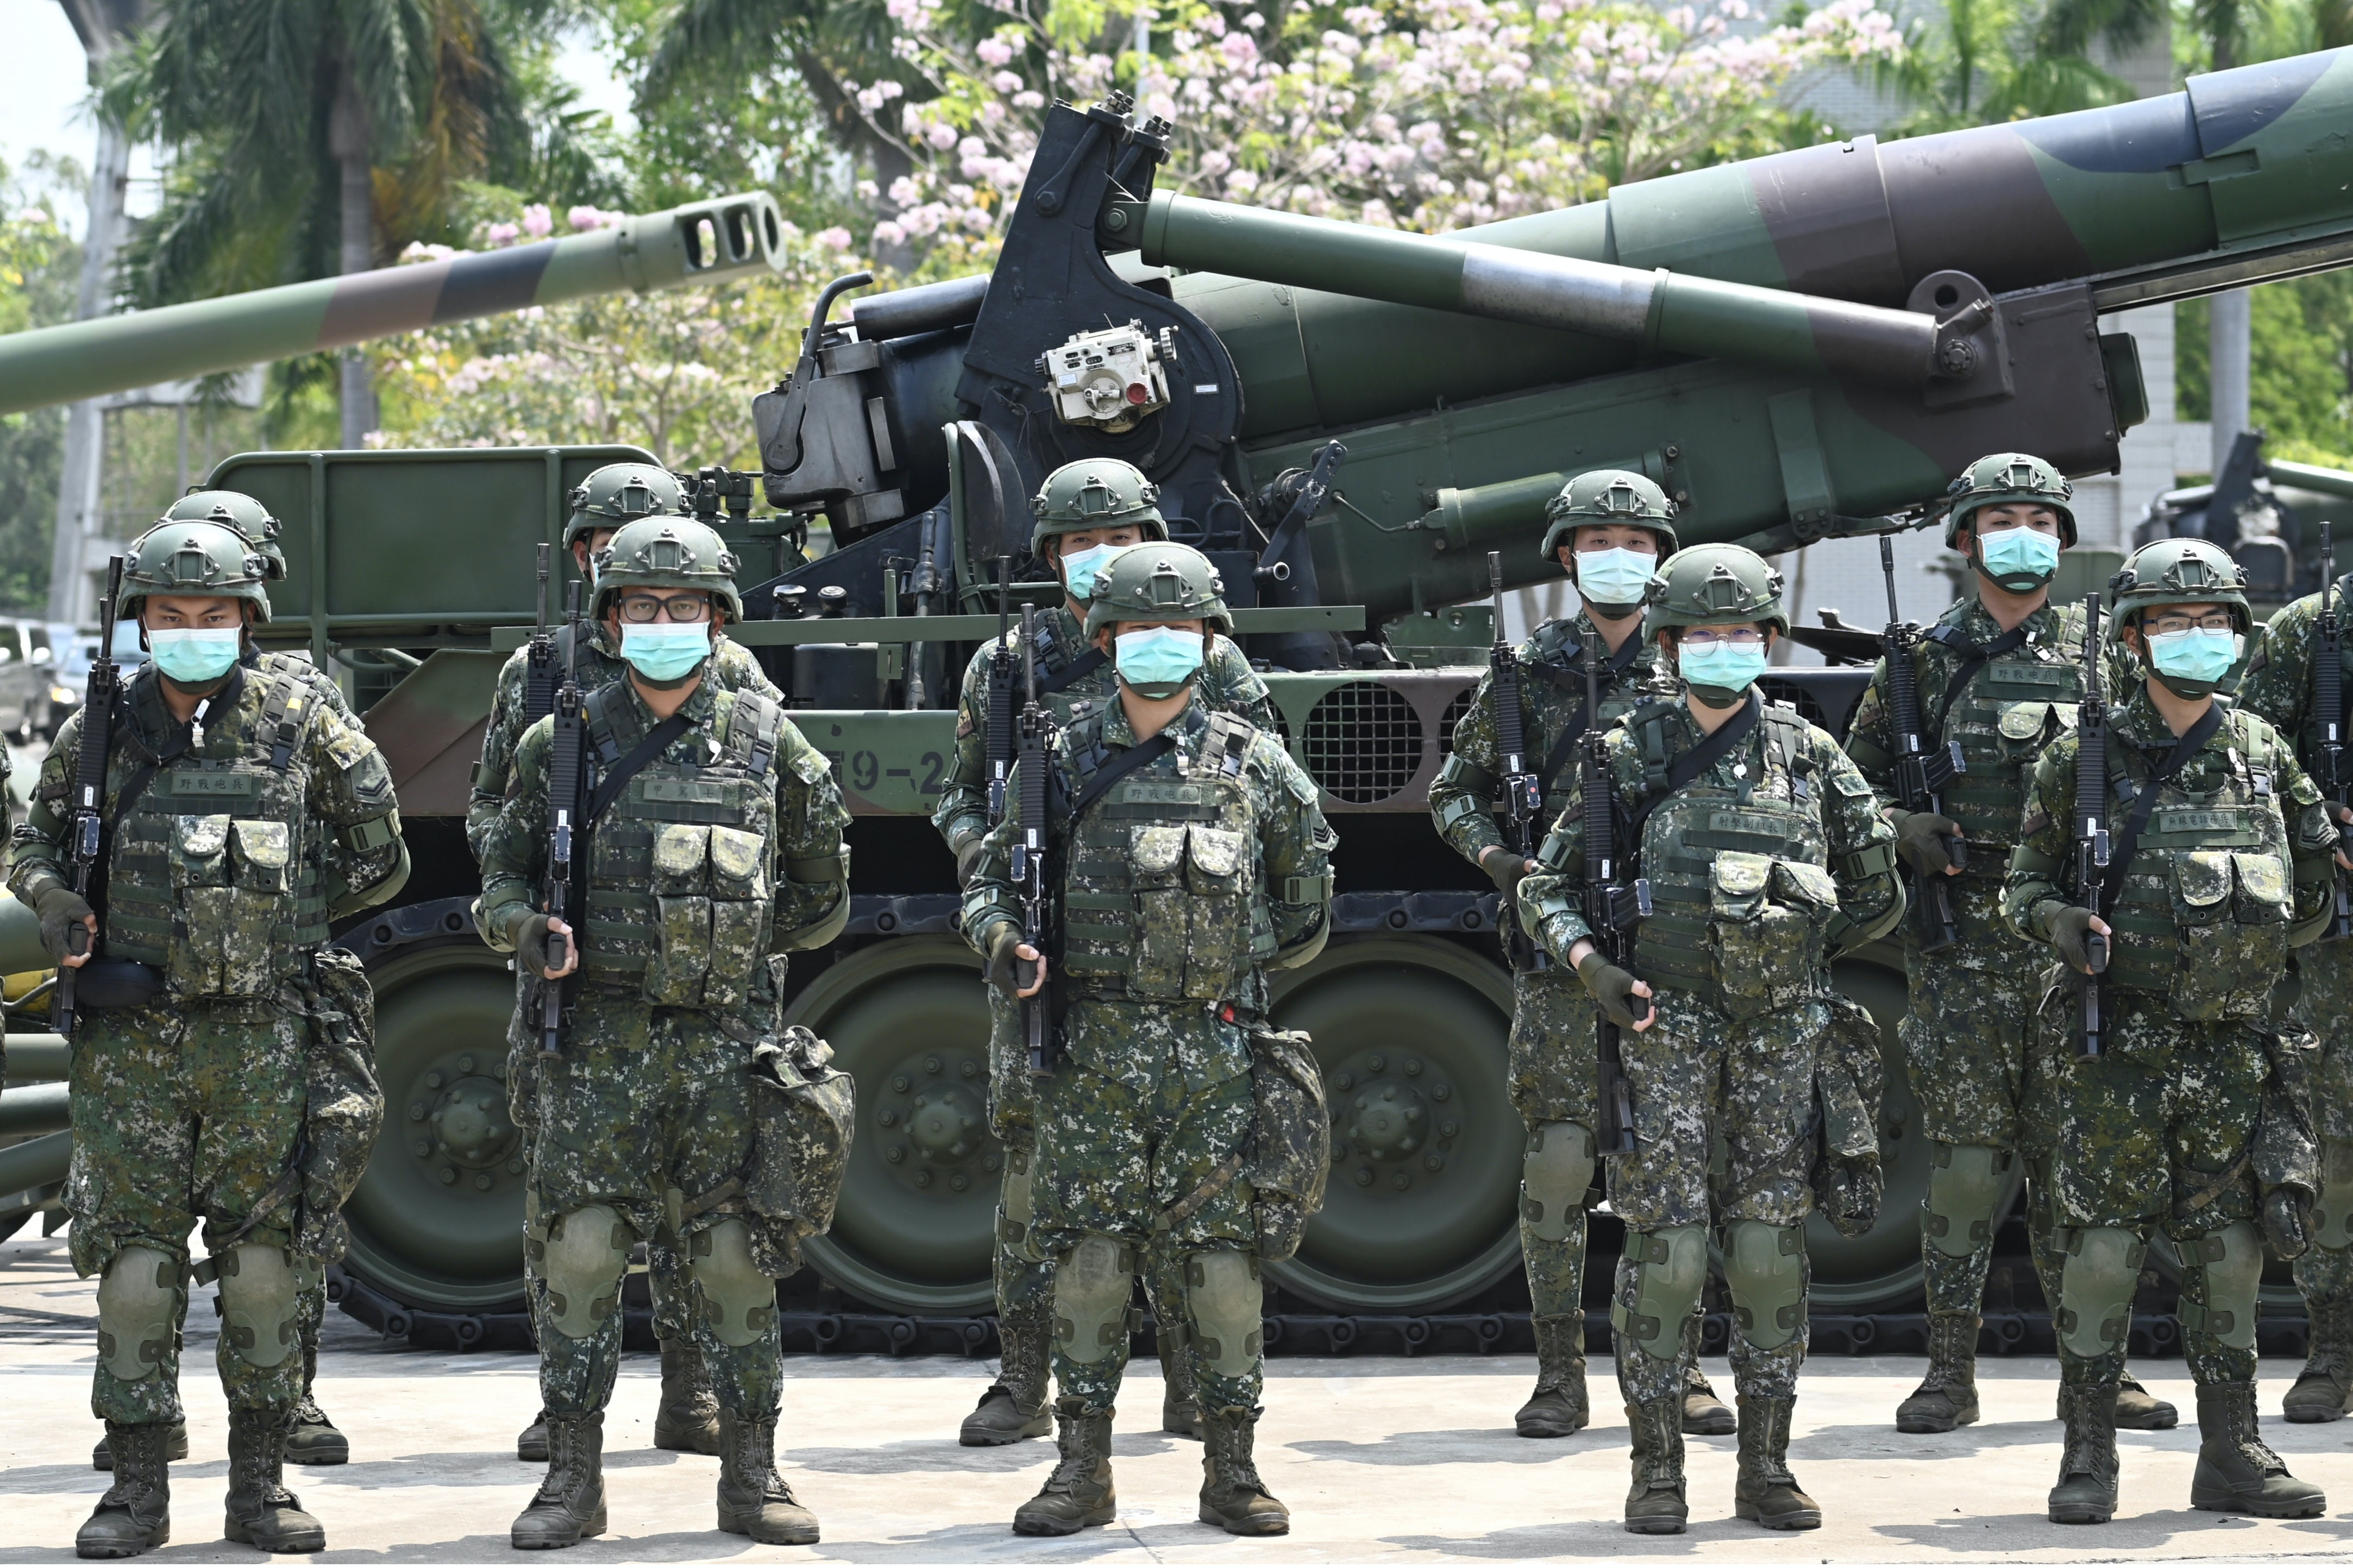 Soldiers wearing face masks amid the COVID-19 coronavirus pandemic stand in formation in front of a US-made M110A2 self-propelled howitzer during Taiwan President Tsai Ing-wen's visit to a military base in Tainan, southern Taiwan, on April 9, 2020. - Taiwan currently has just 375 confirmed Covid-19 patients and five deaths …